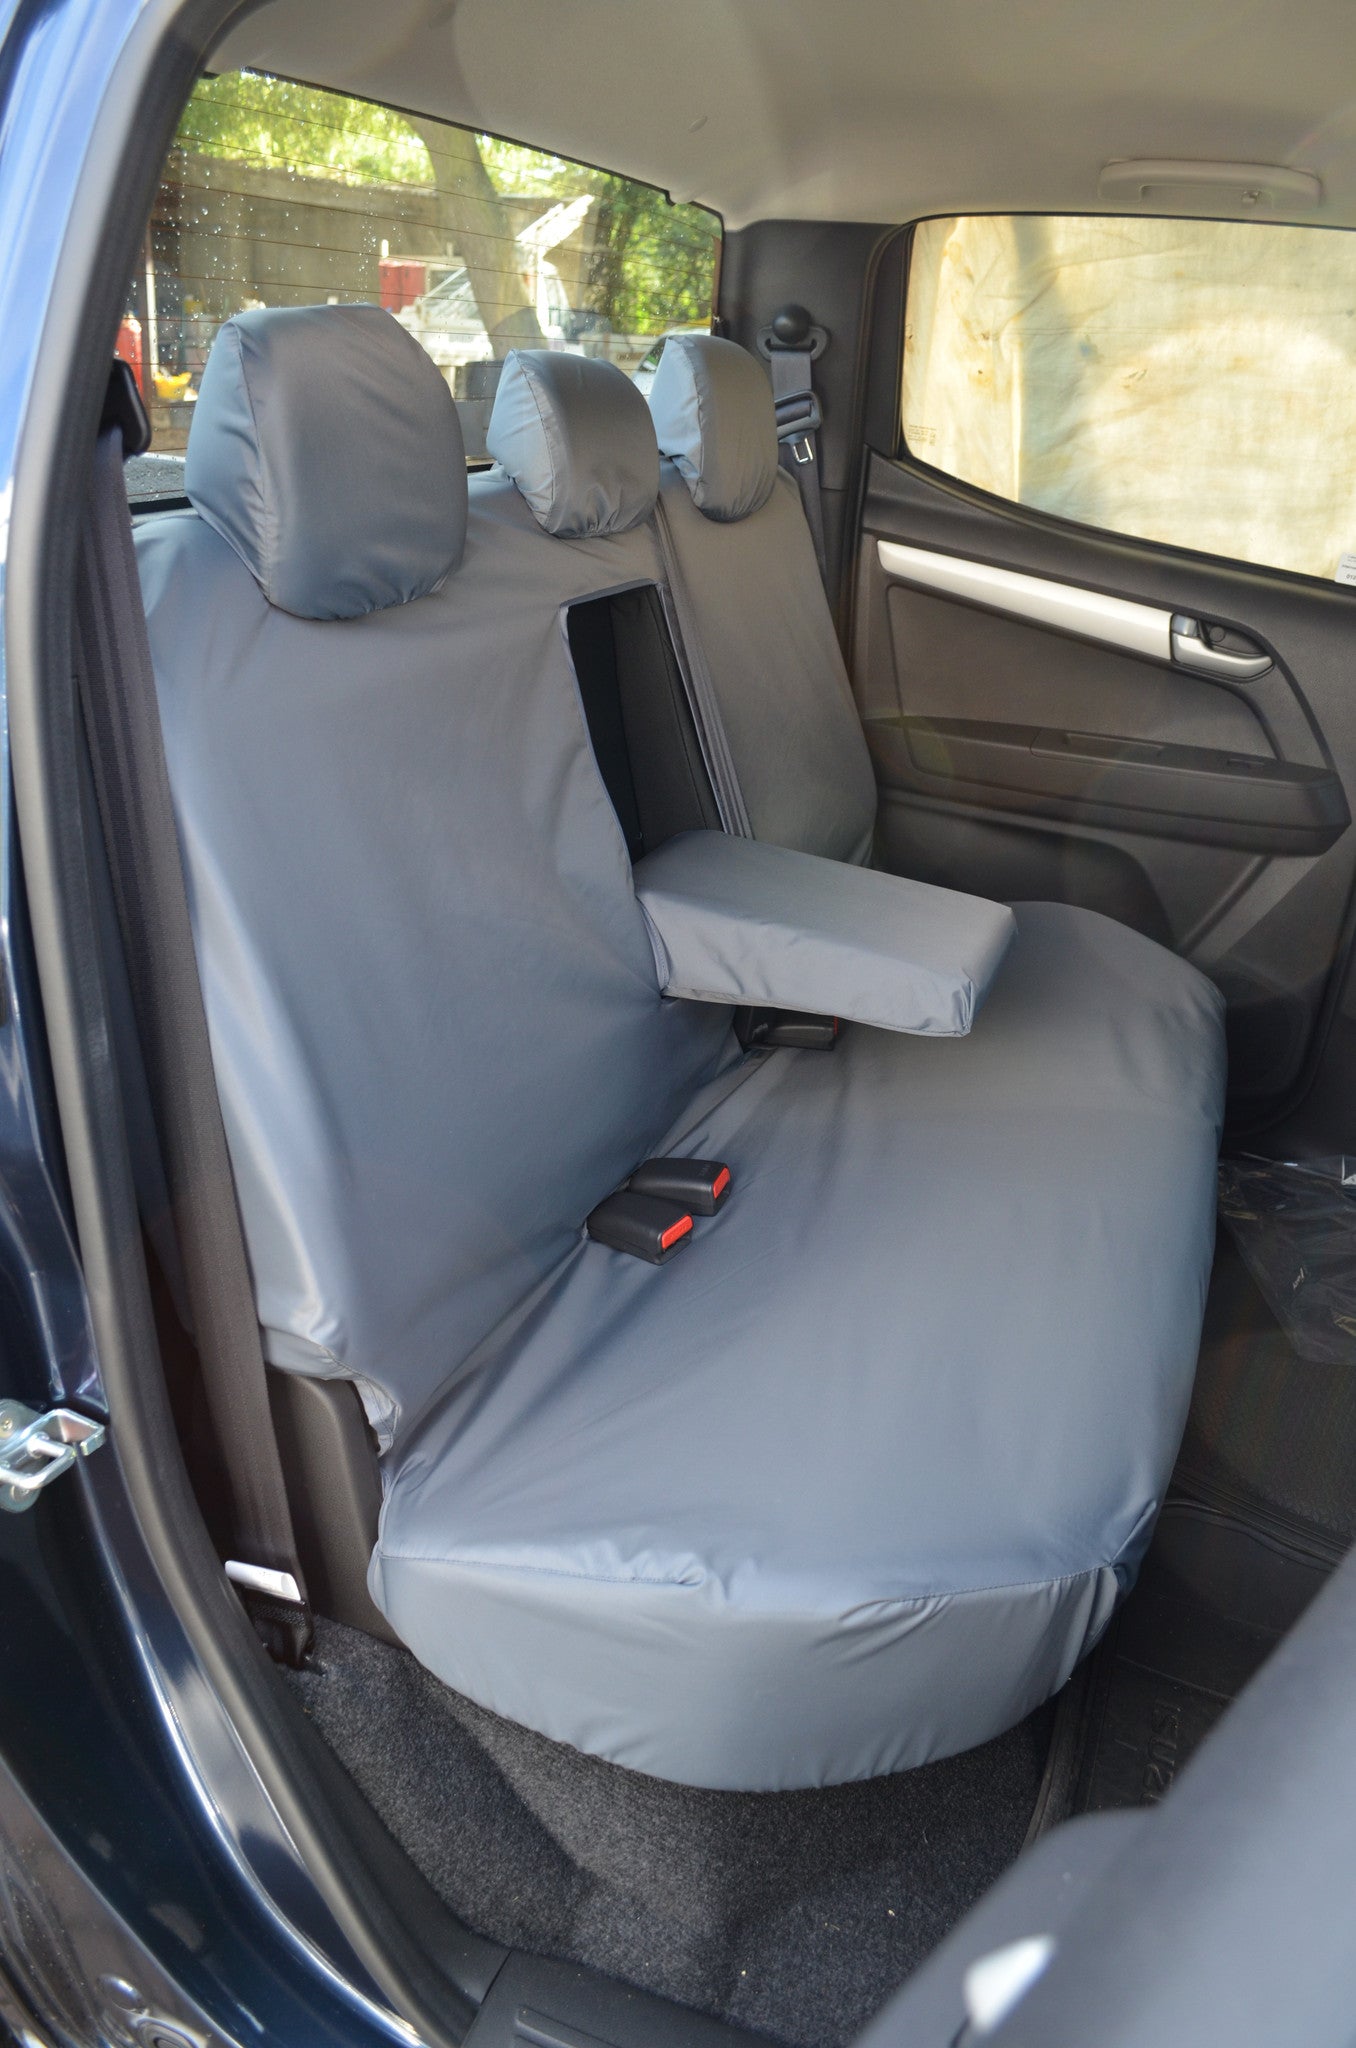 Isuzu D-Max 2012 Onwards Seat Covers Rear Seat Cover with Central Armrest / Grey Turtle Covers Ltd